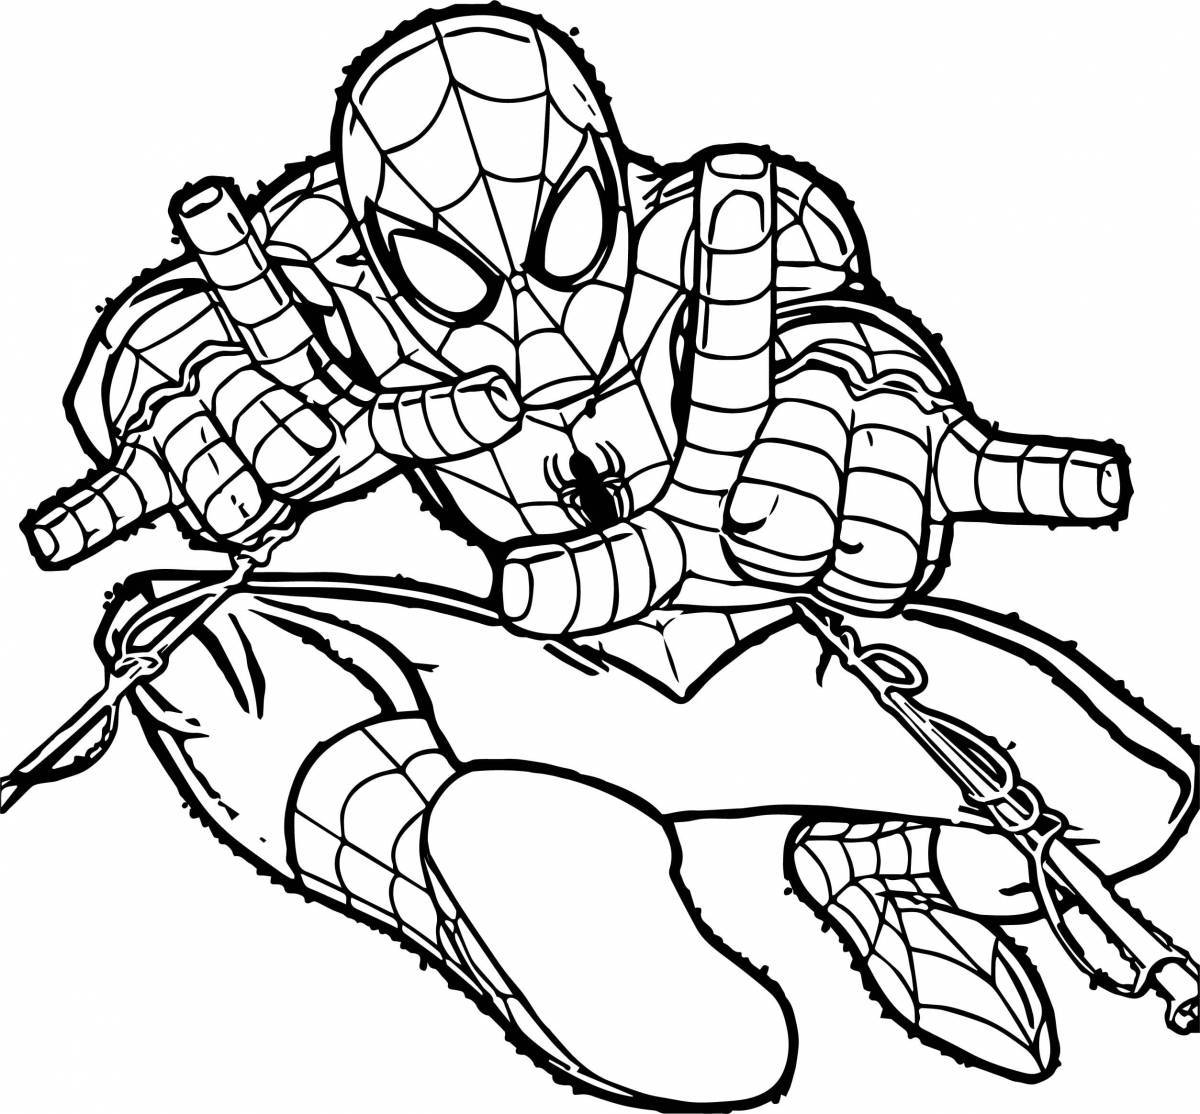 Spiderman coloring book for boys